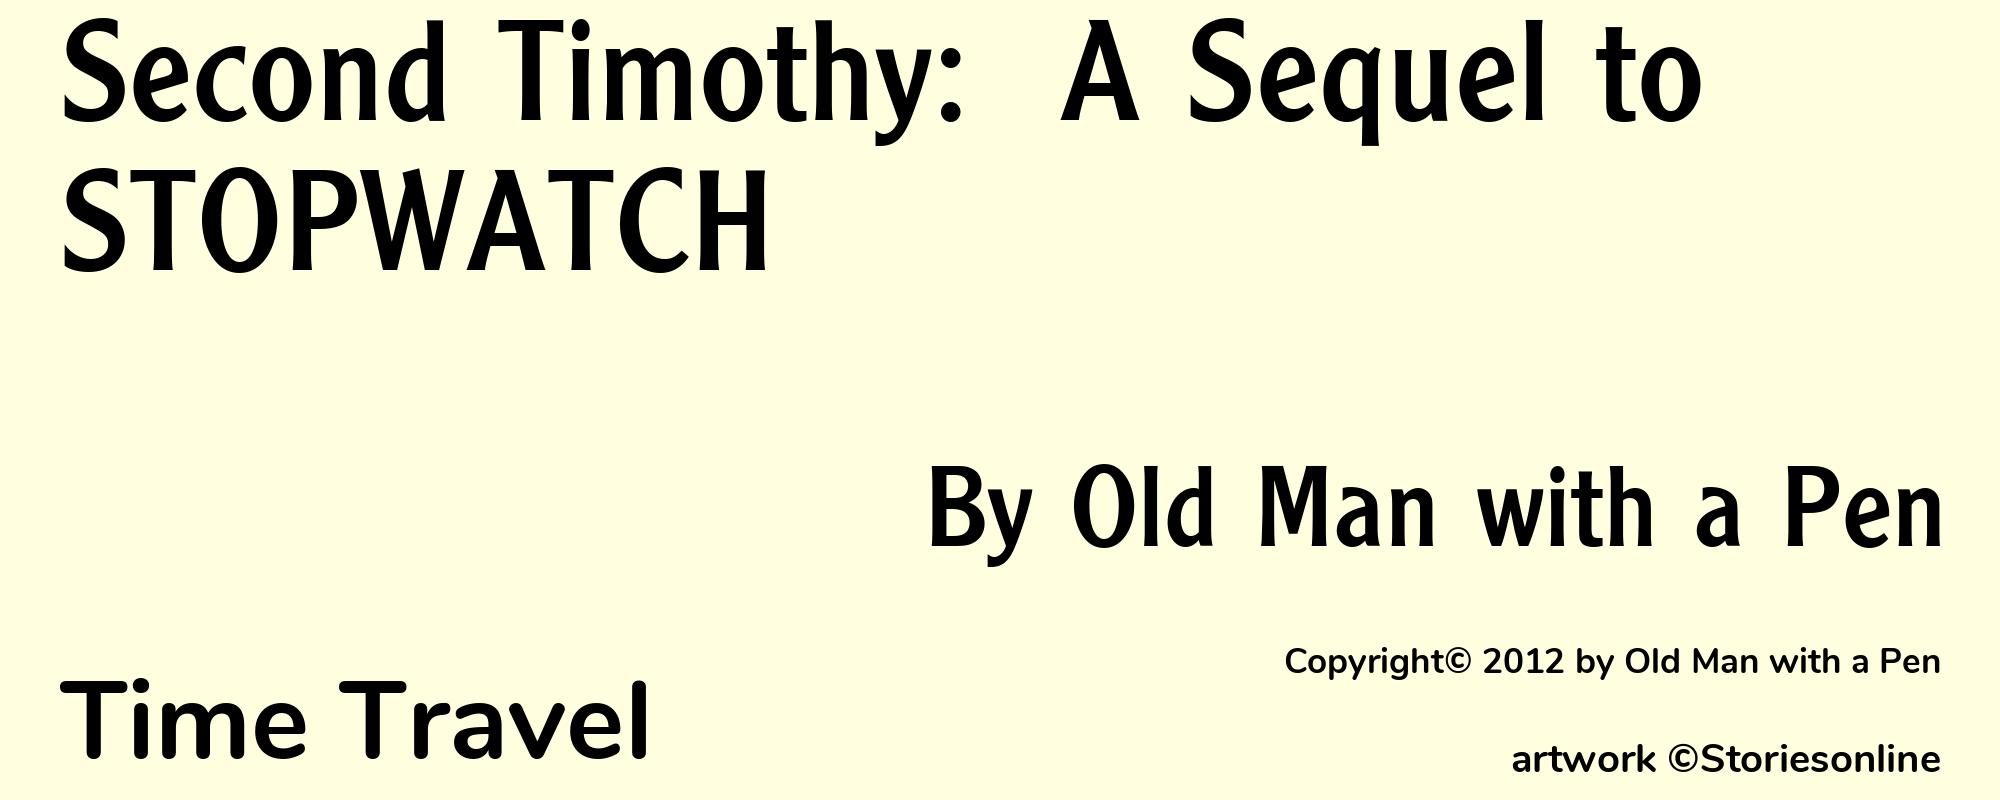 Second Timothy:  A Sequel to STOPWATCH - Cover